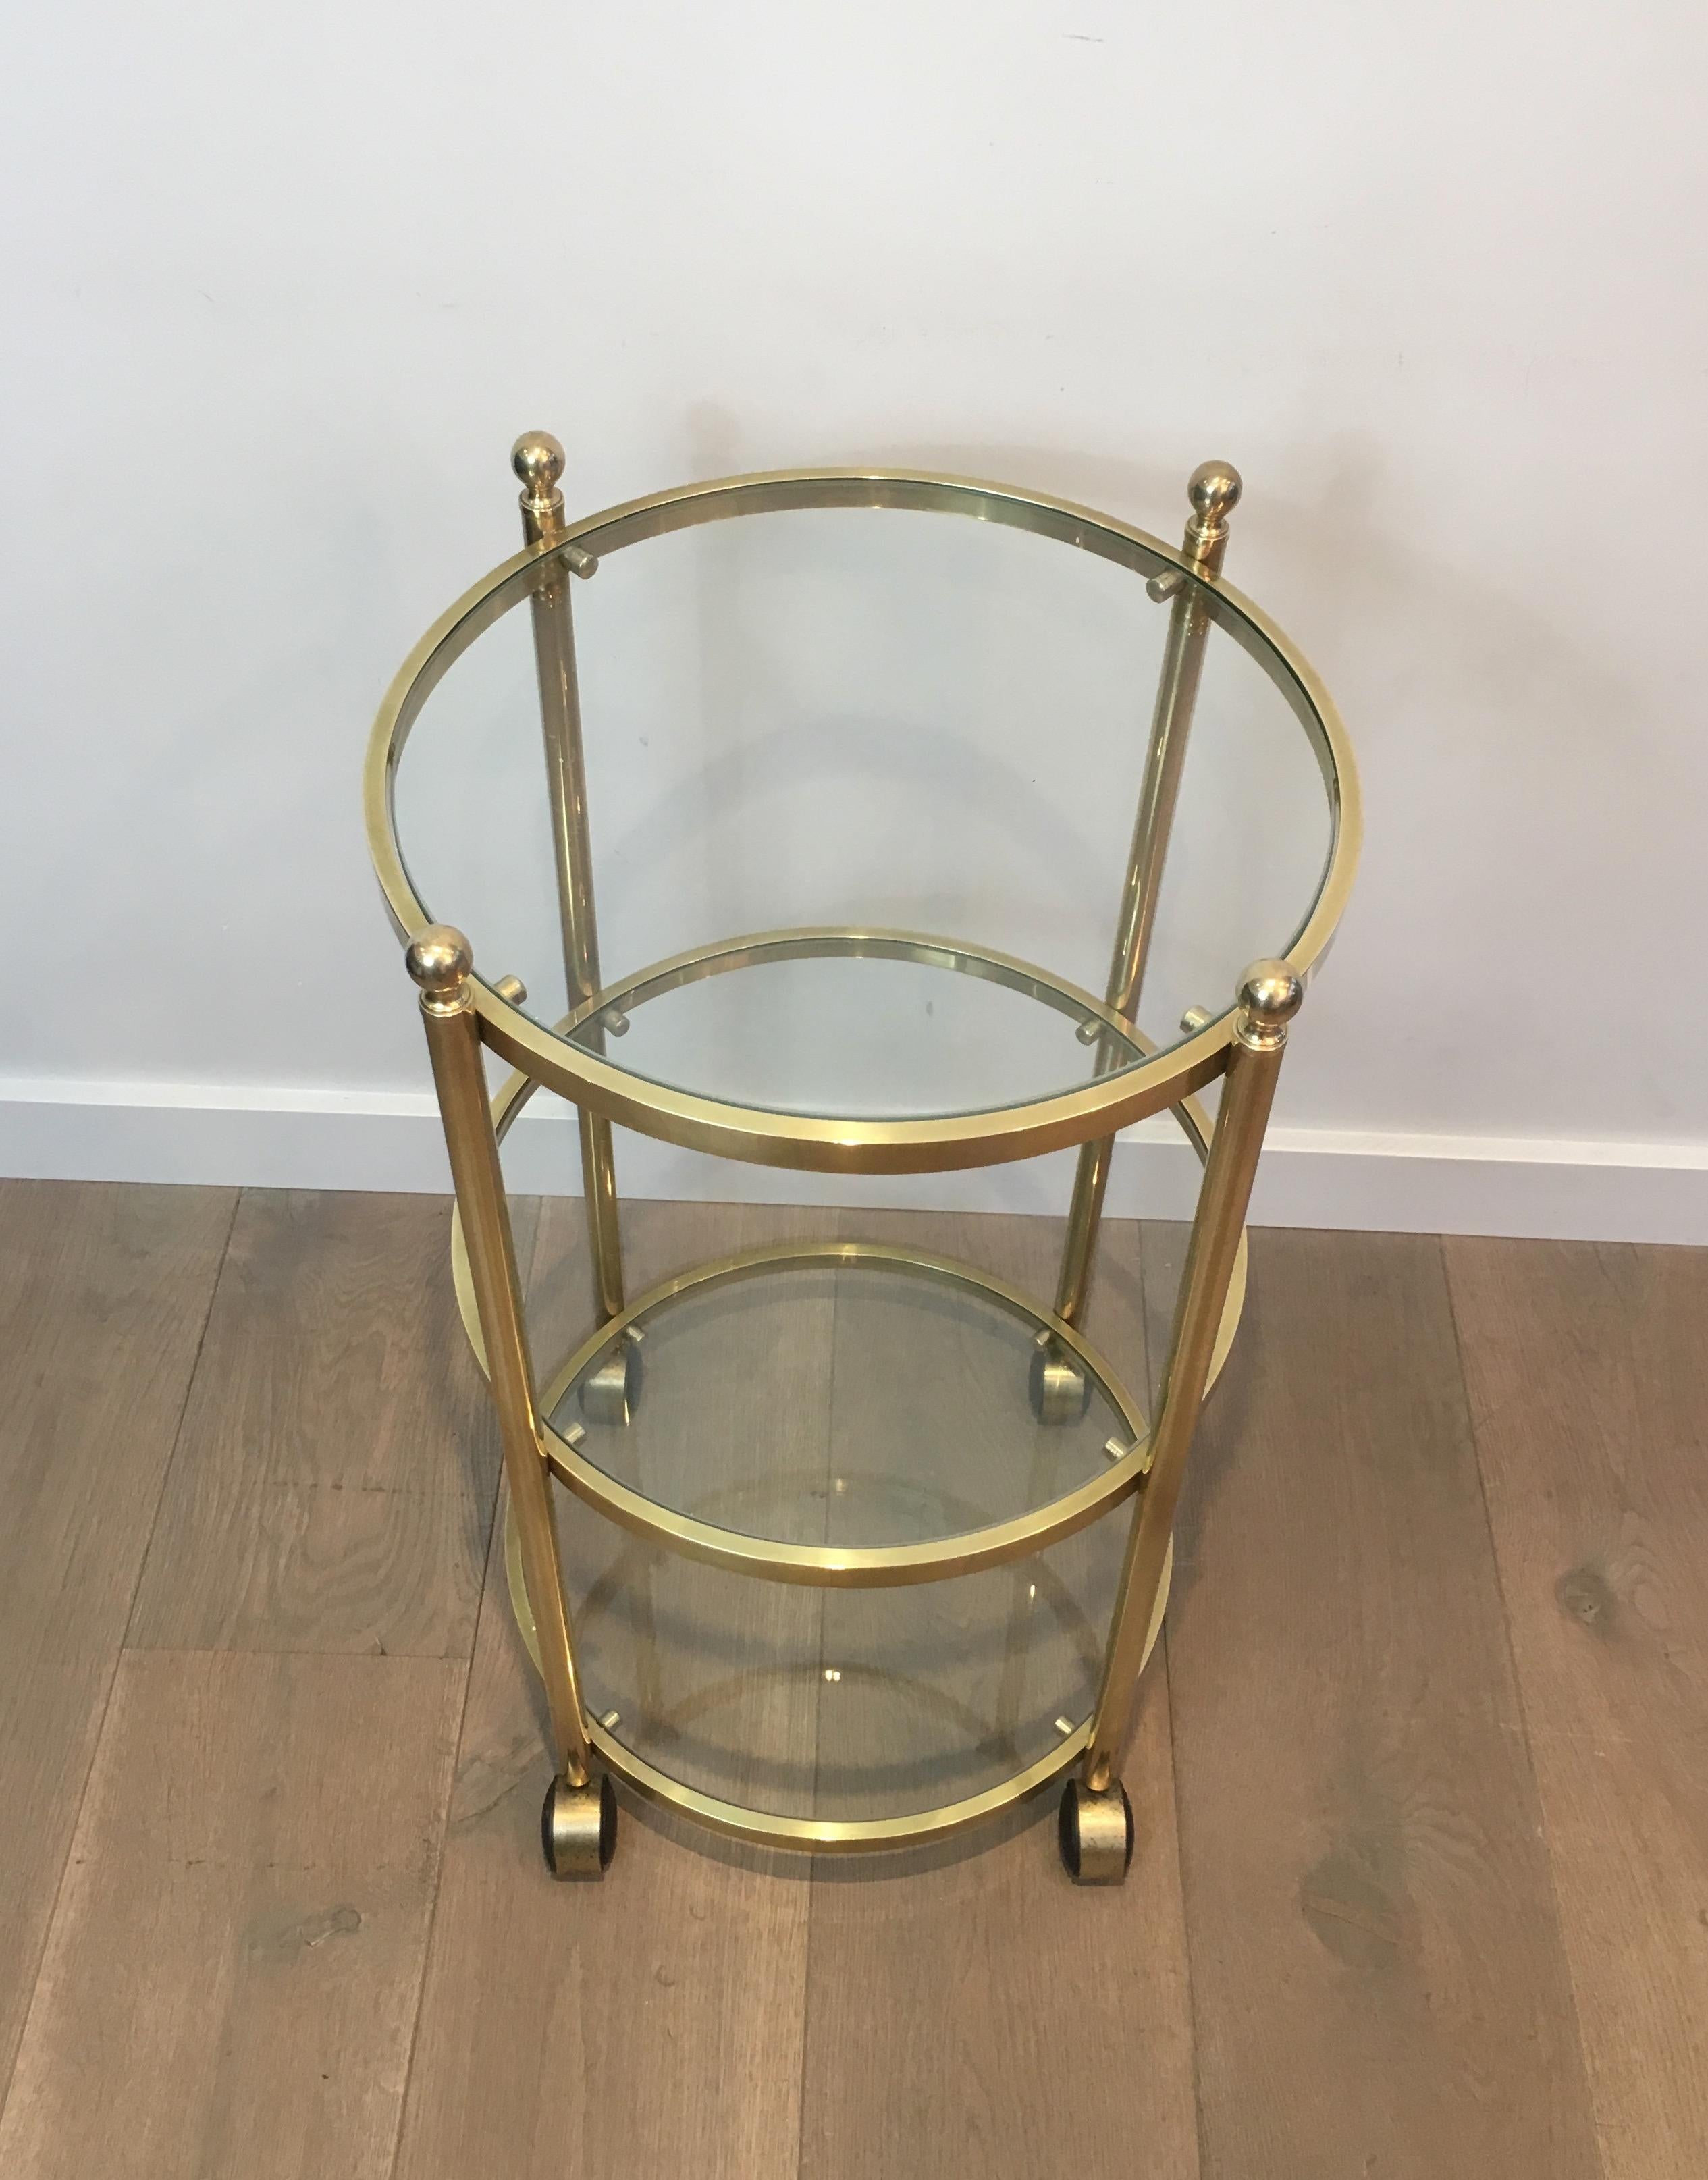 Neoclassical 3 Tiers Round Brass Side Table on Casters, French, circa 1970